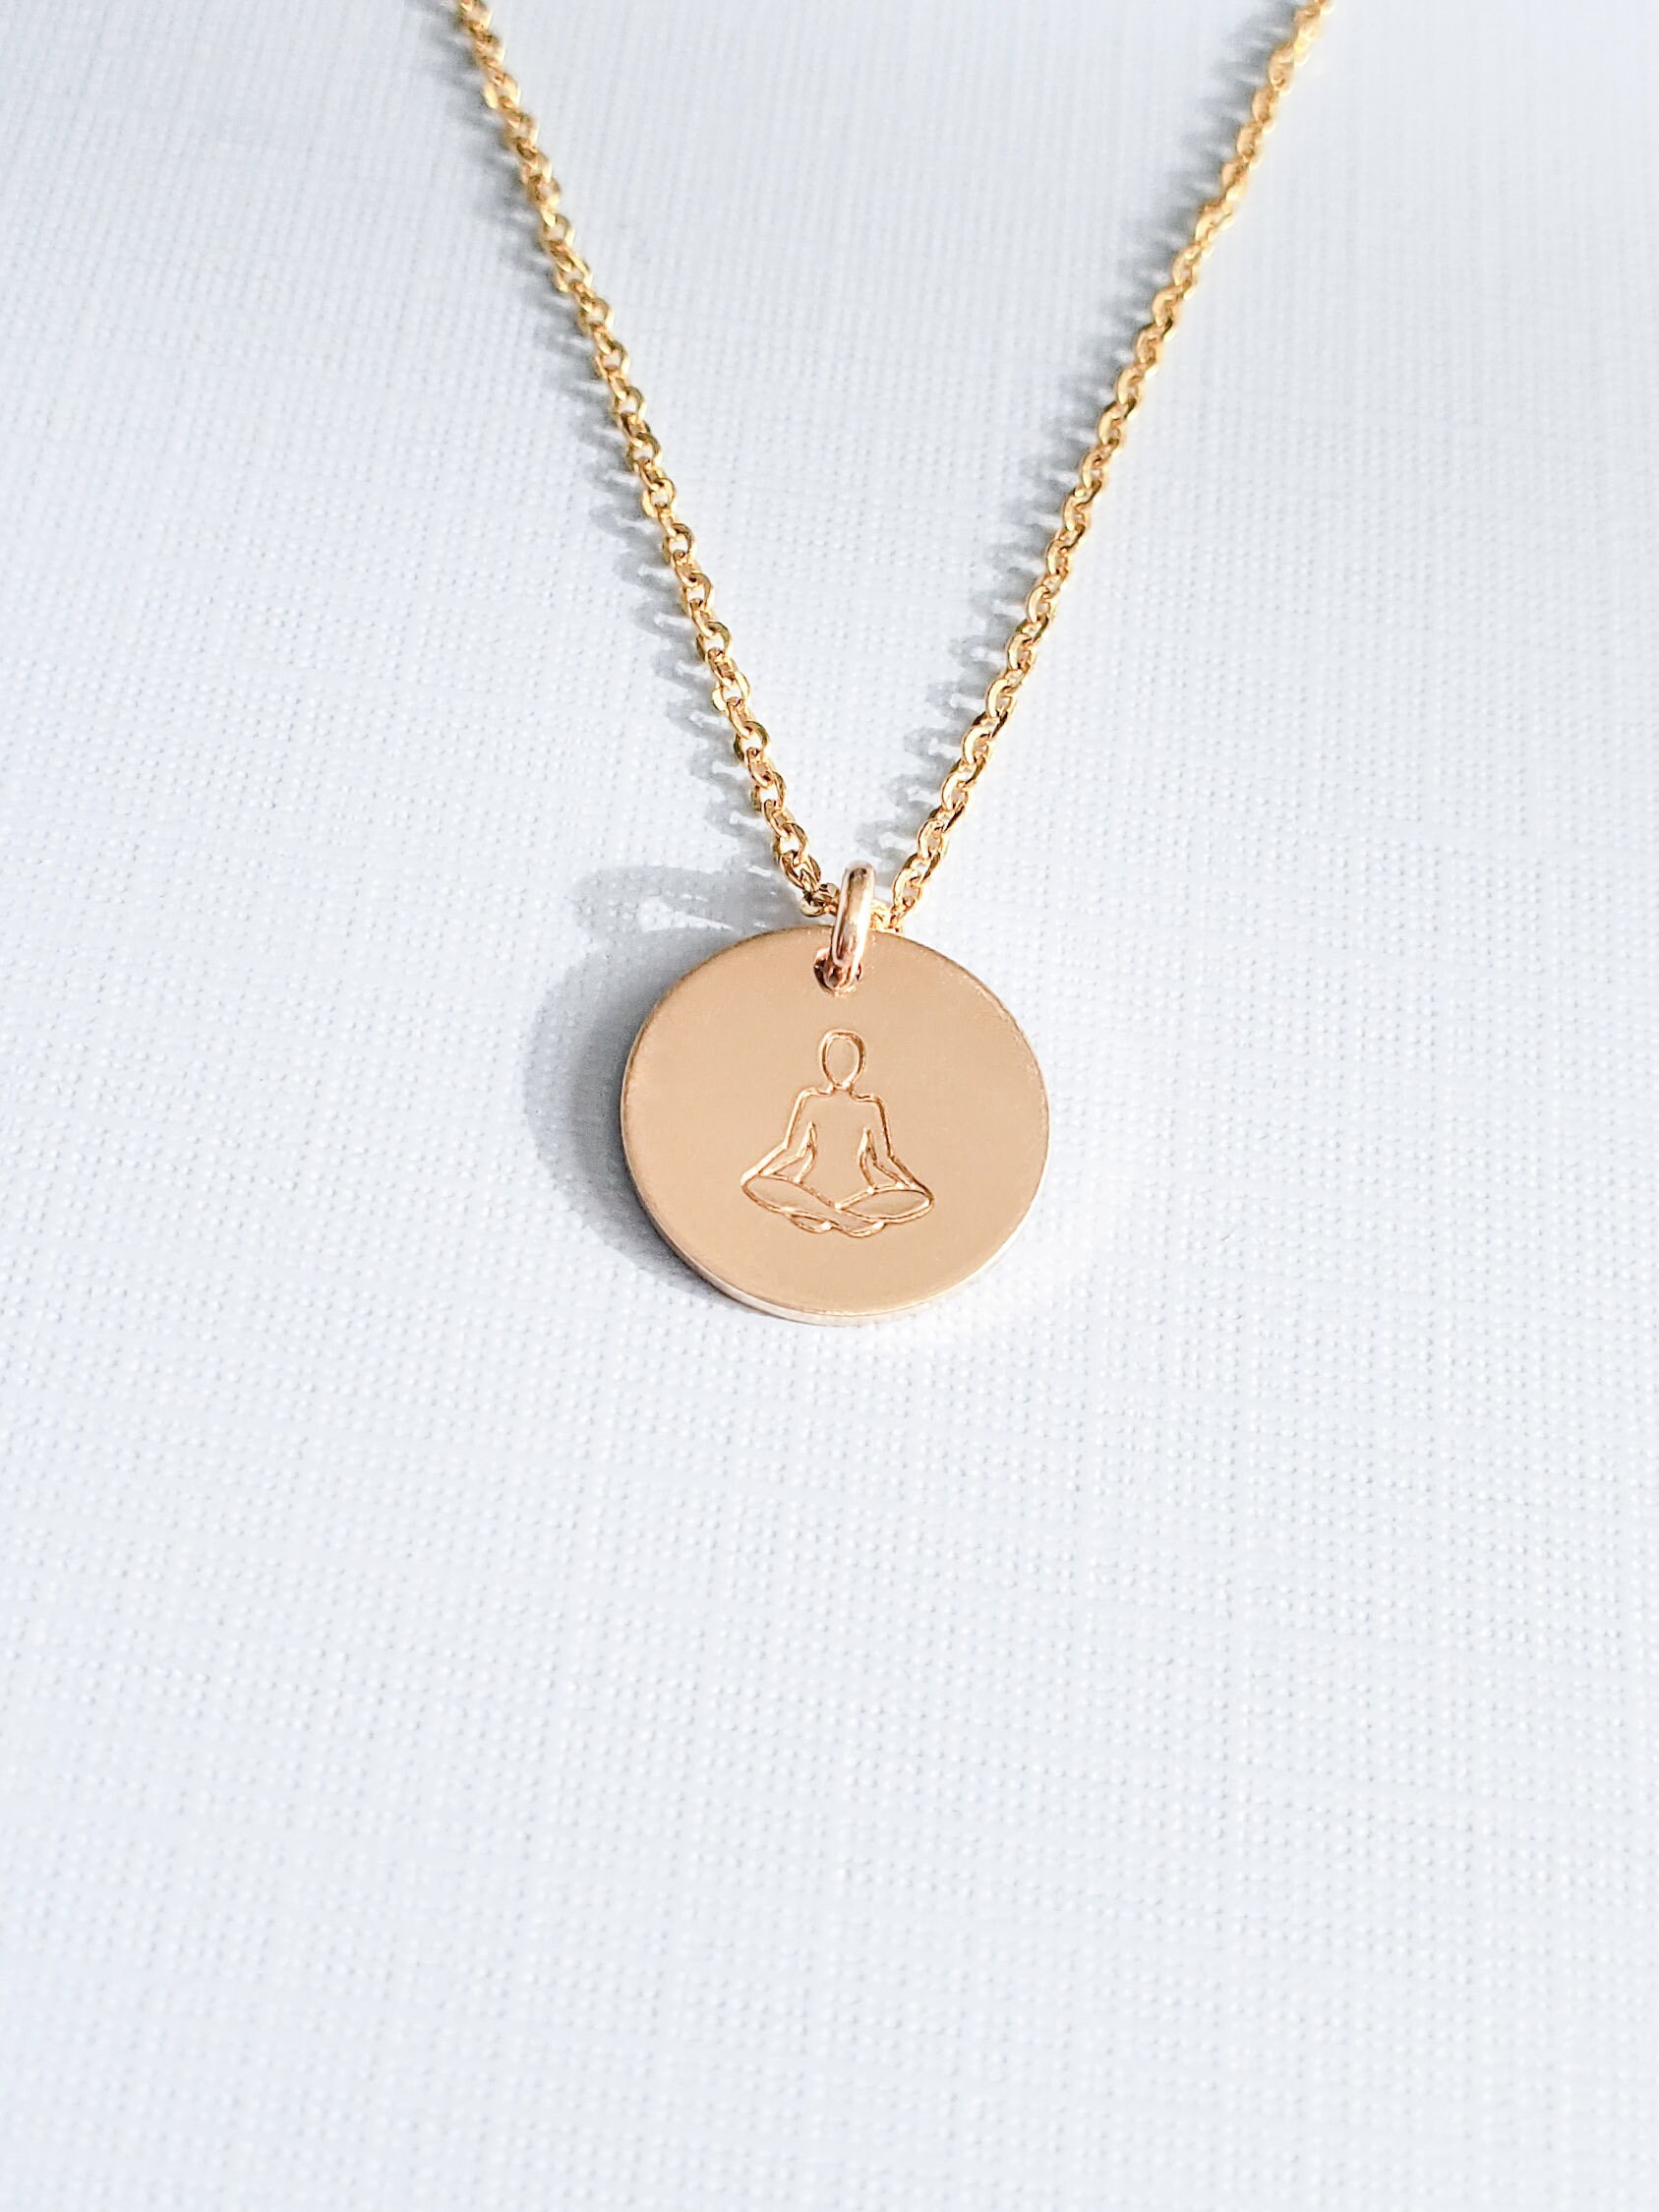 Yoga Necklace 14K Gold Filled Mothers Gift Charm - Etsy